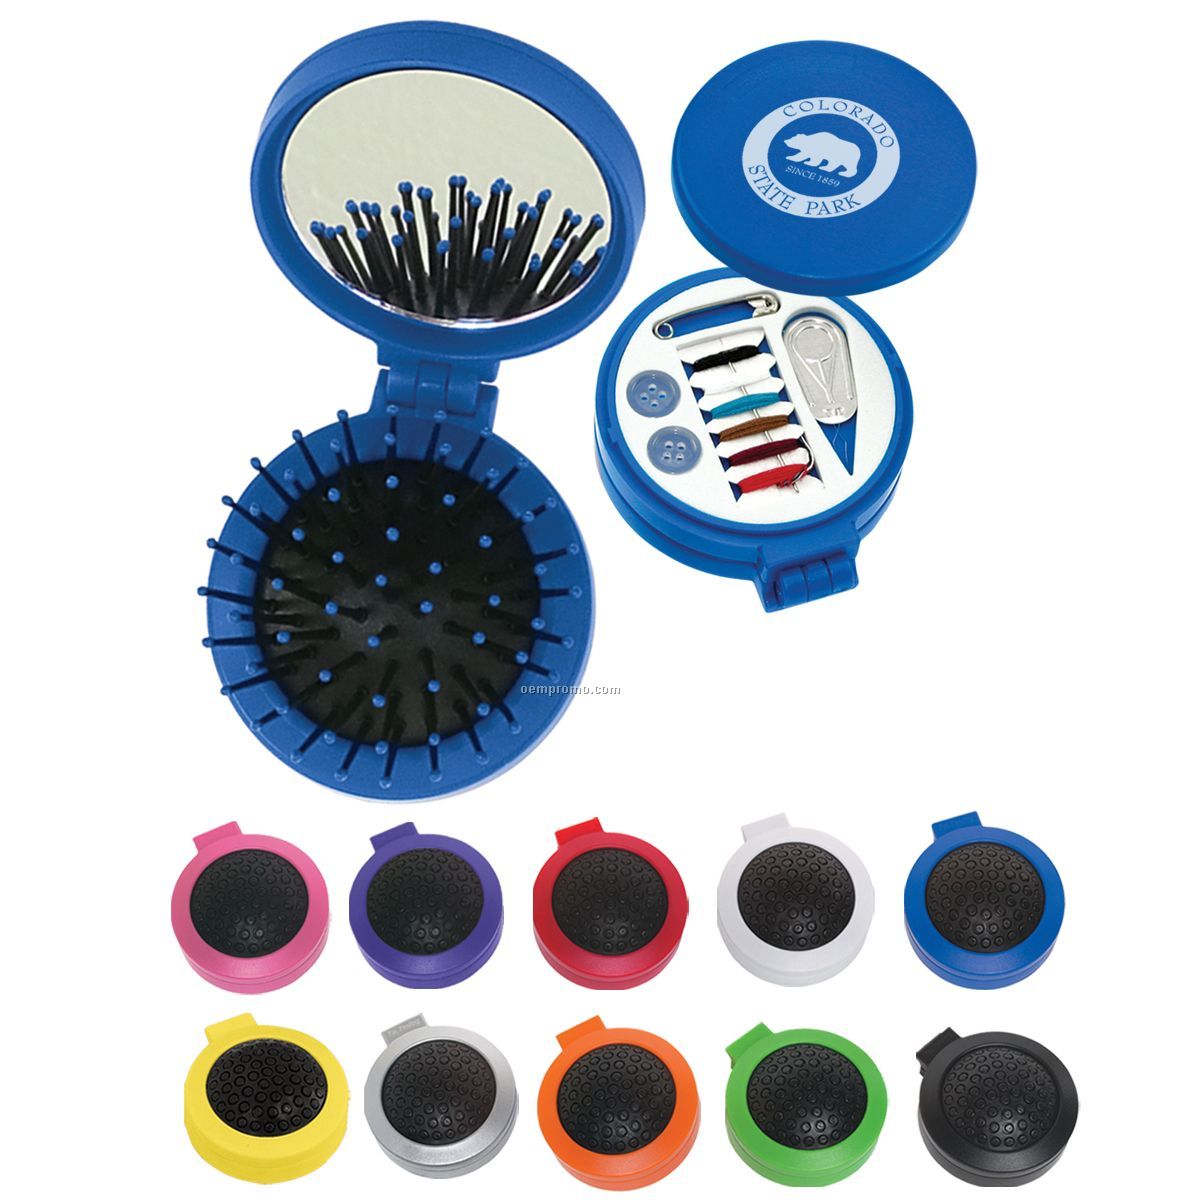 3-in-1 Sewing Kit W/ Mirror & Hair Brush (Colored)